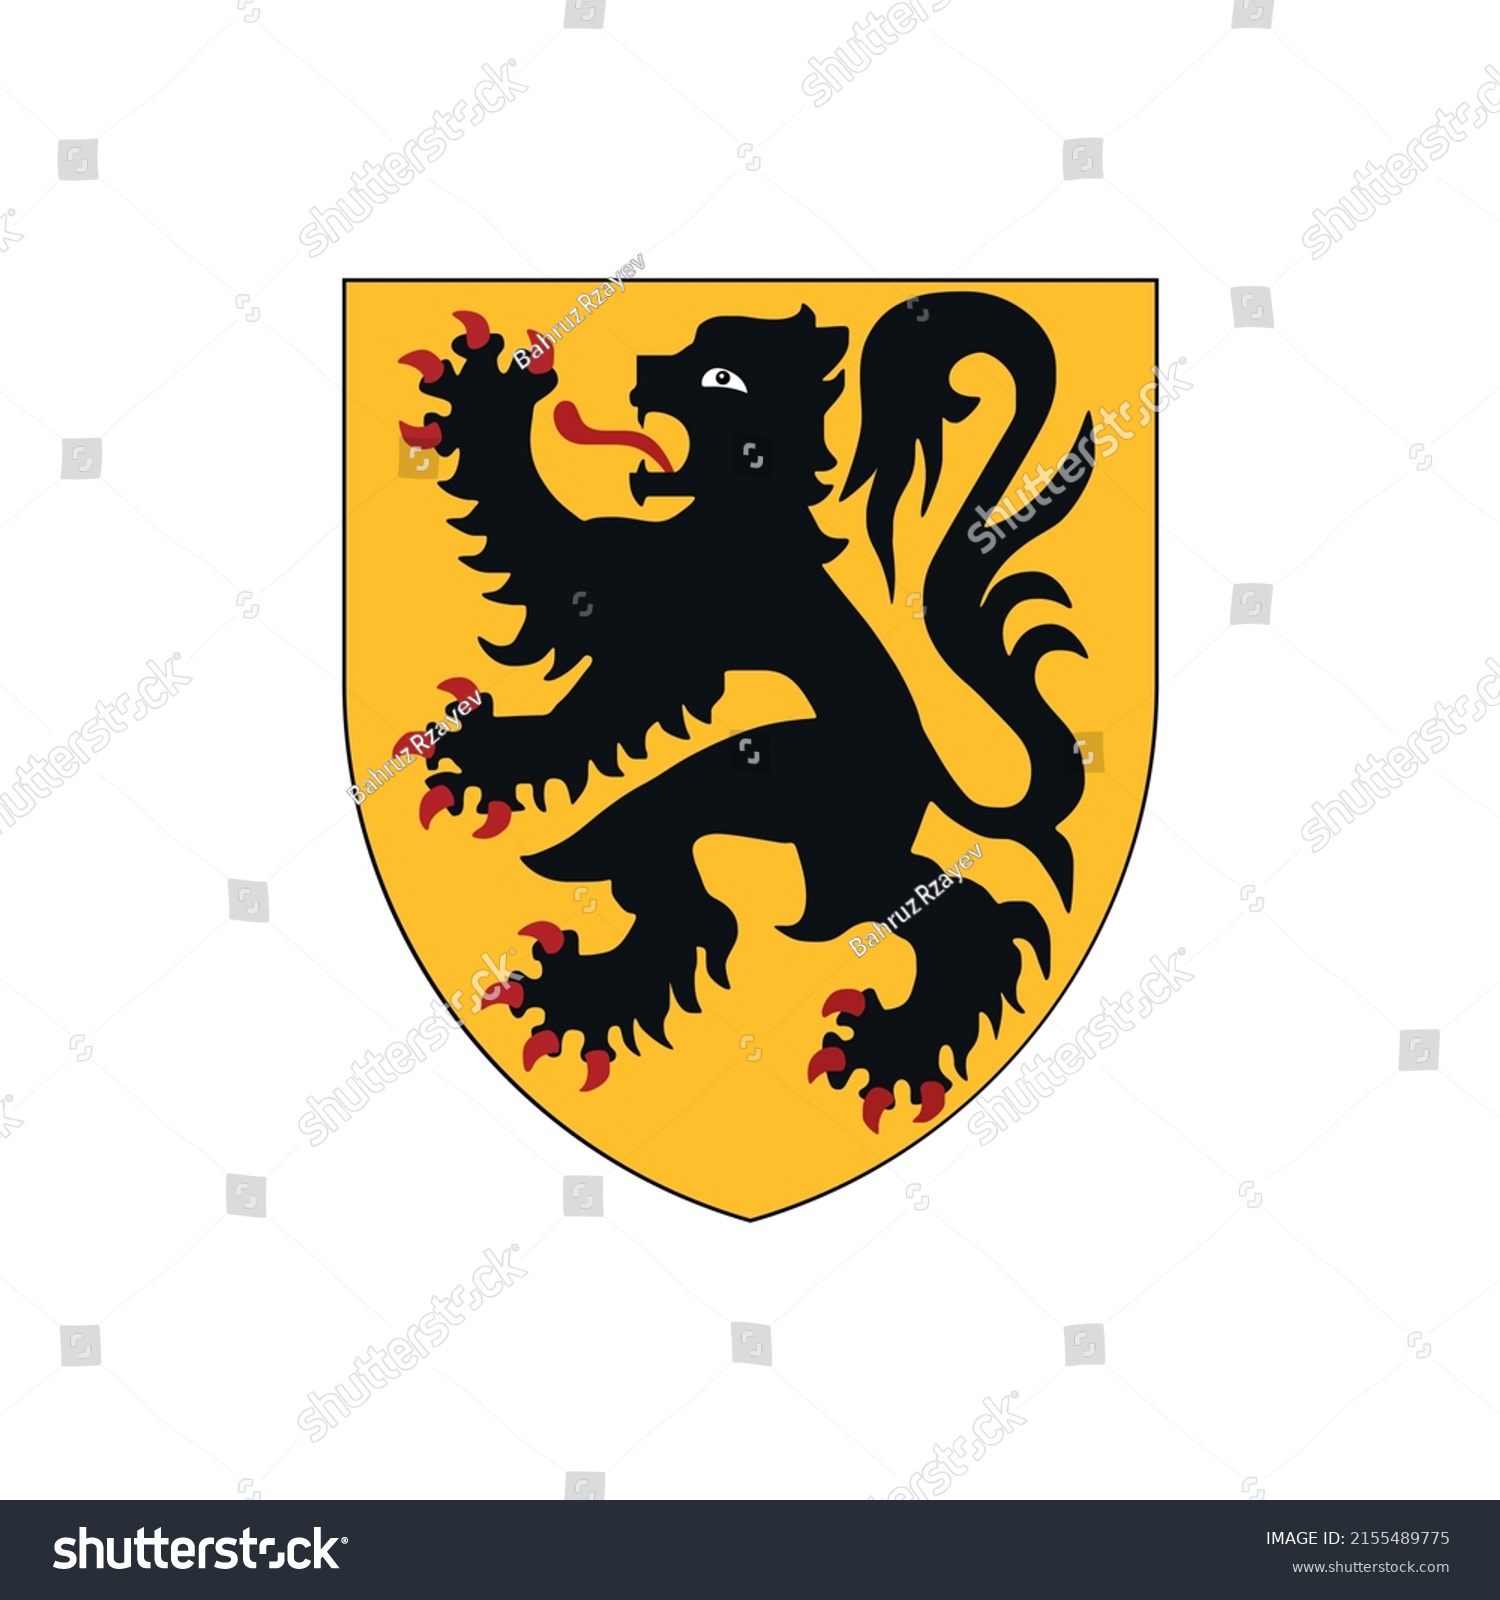 SVG of Flag and arms of Flanders - Belgium outline silhouette vector illustration
 svg